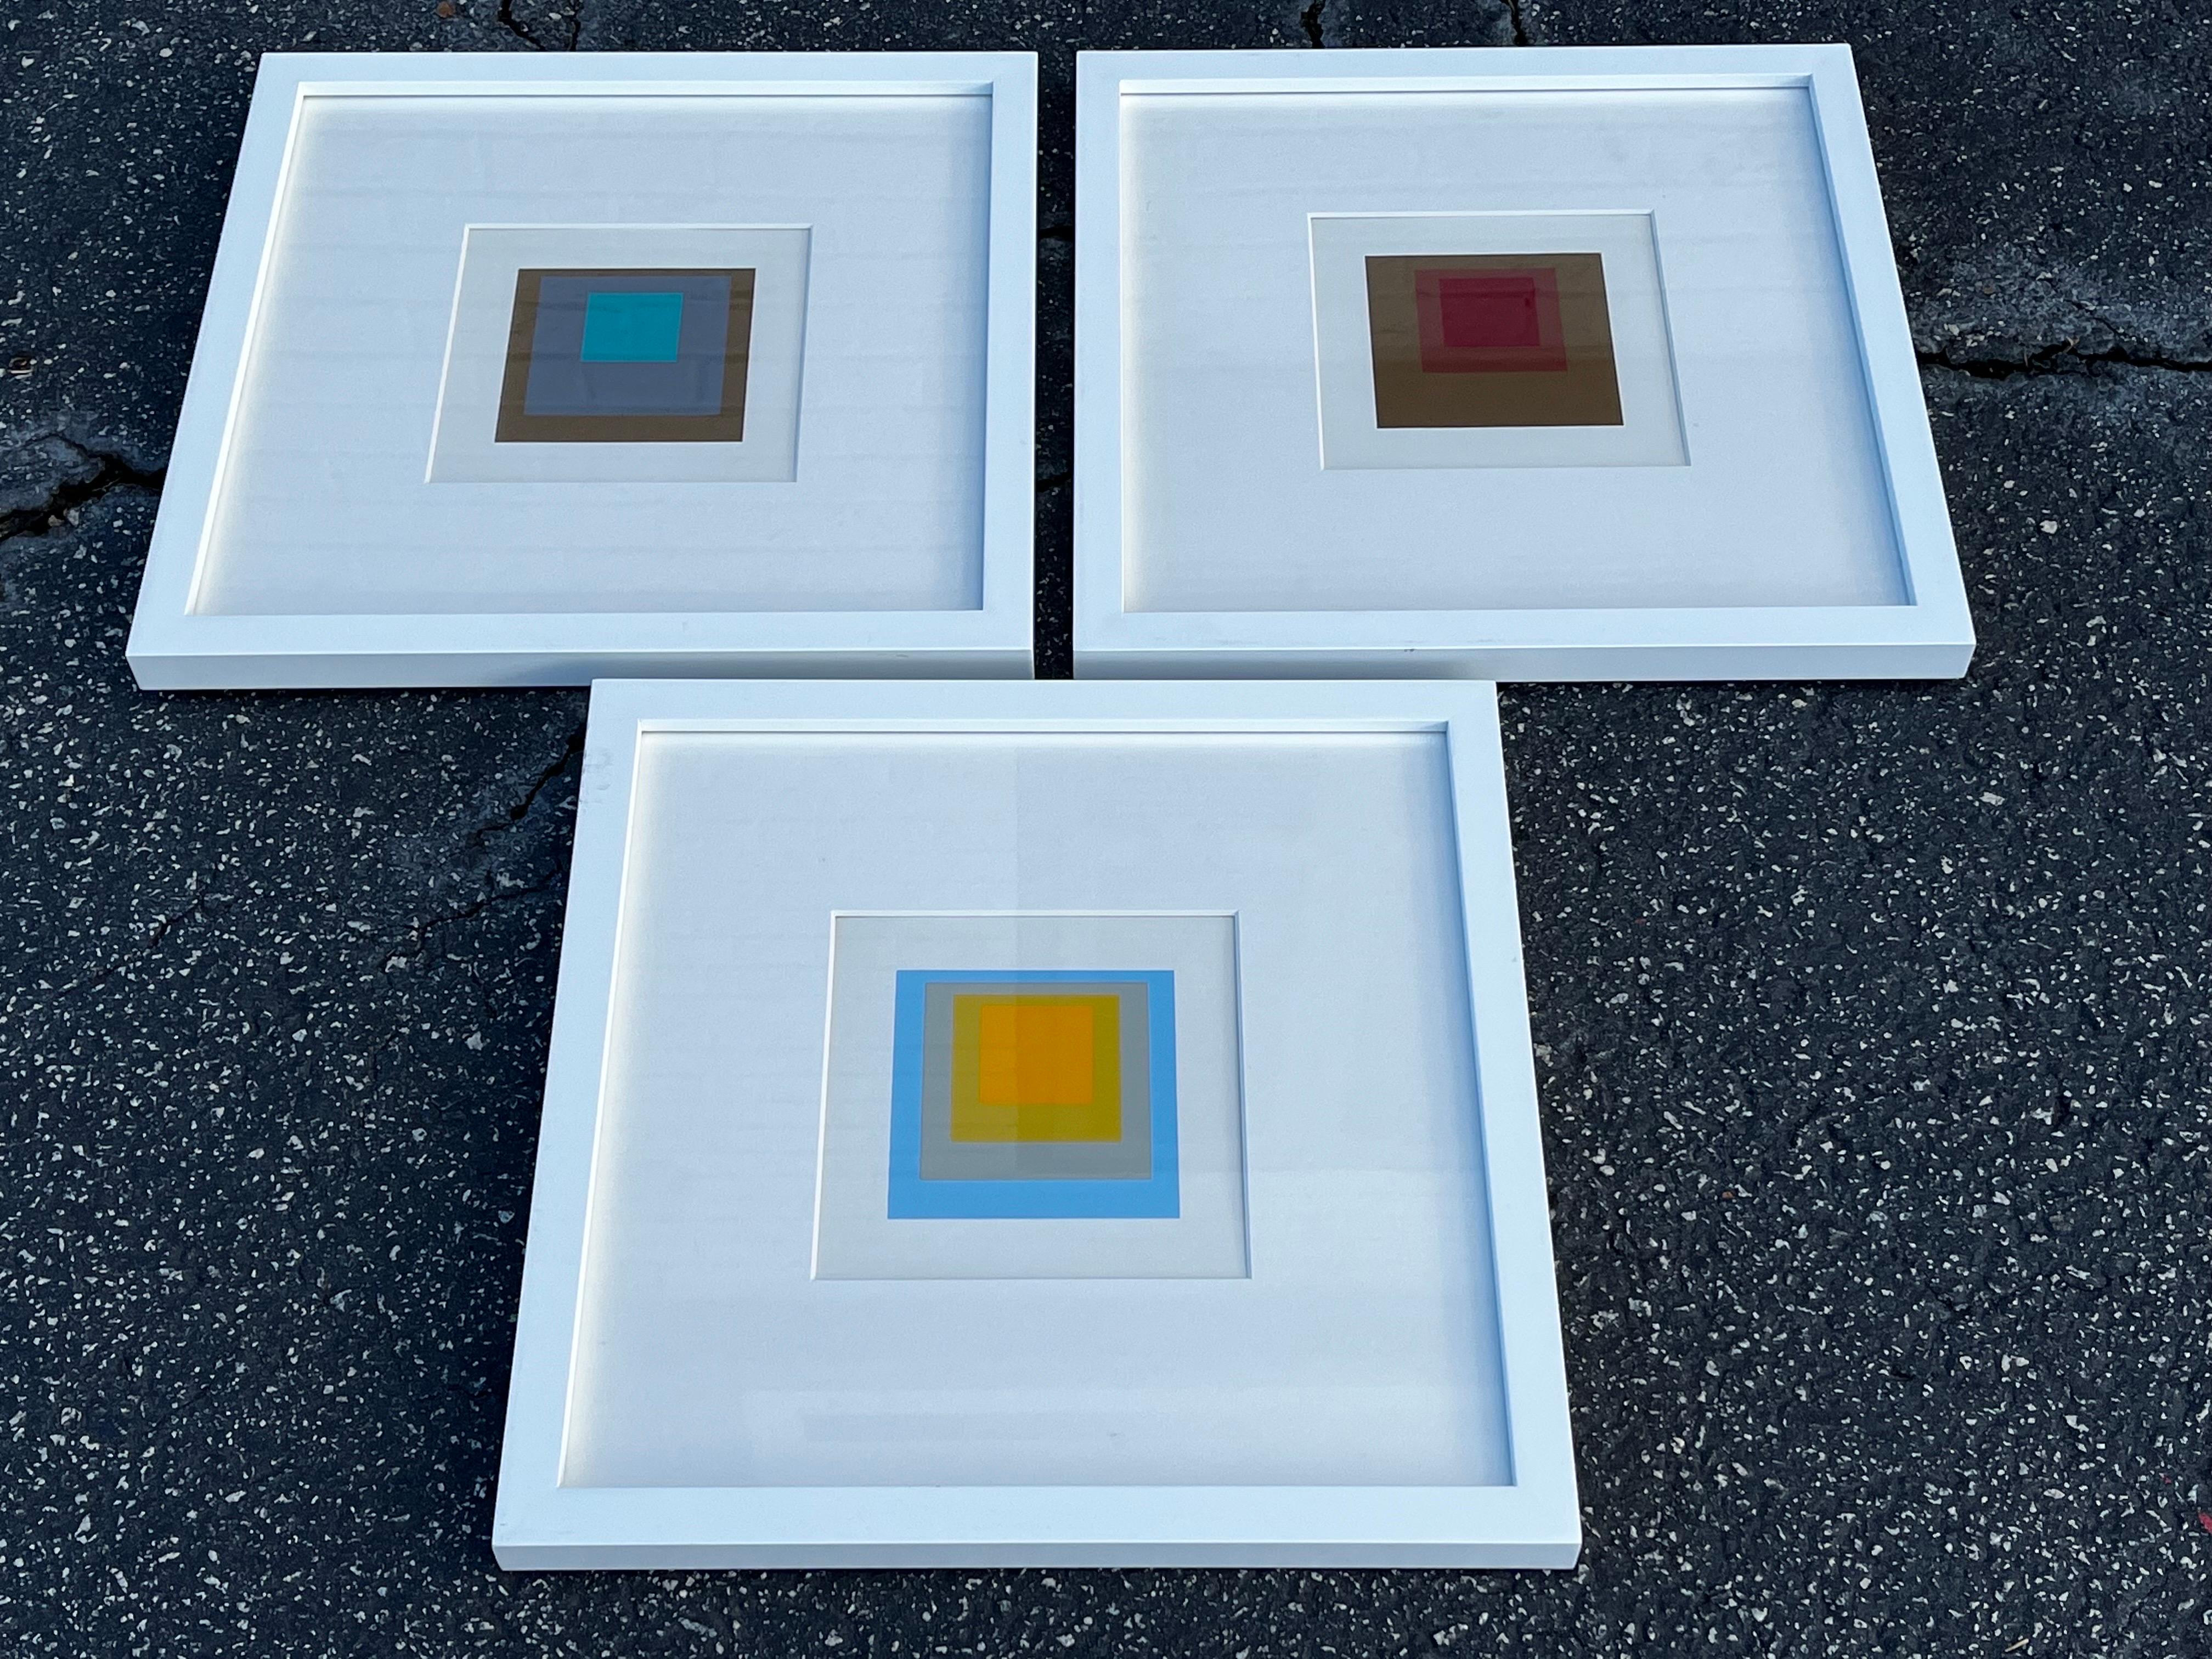 A set of three vintage circa 1965 mid 20th Century hard edge geometric silkscreen serigraph prints from the Homage to the Square by Joseph Albers. These prints were part of promotional materials sent to prospective clients to purchase the book. The